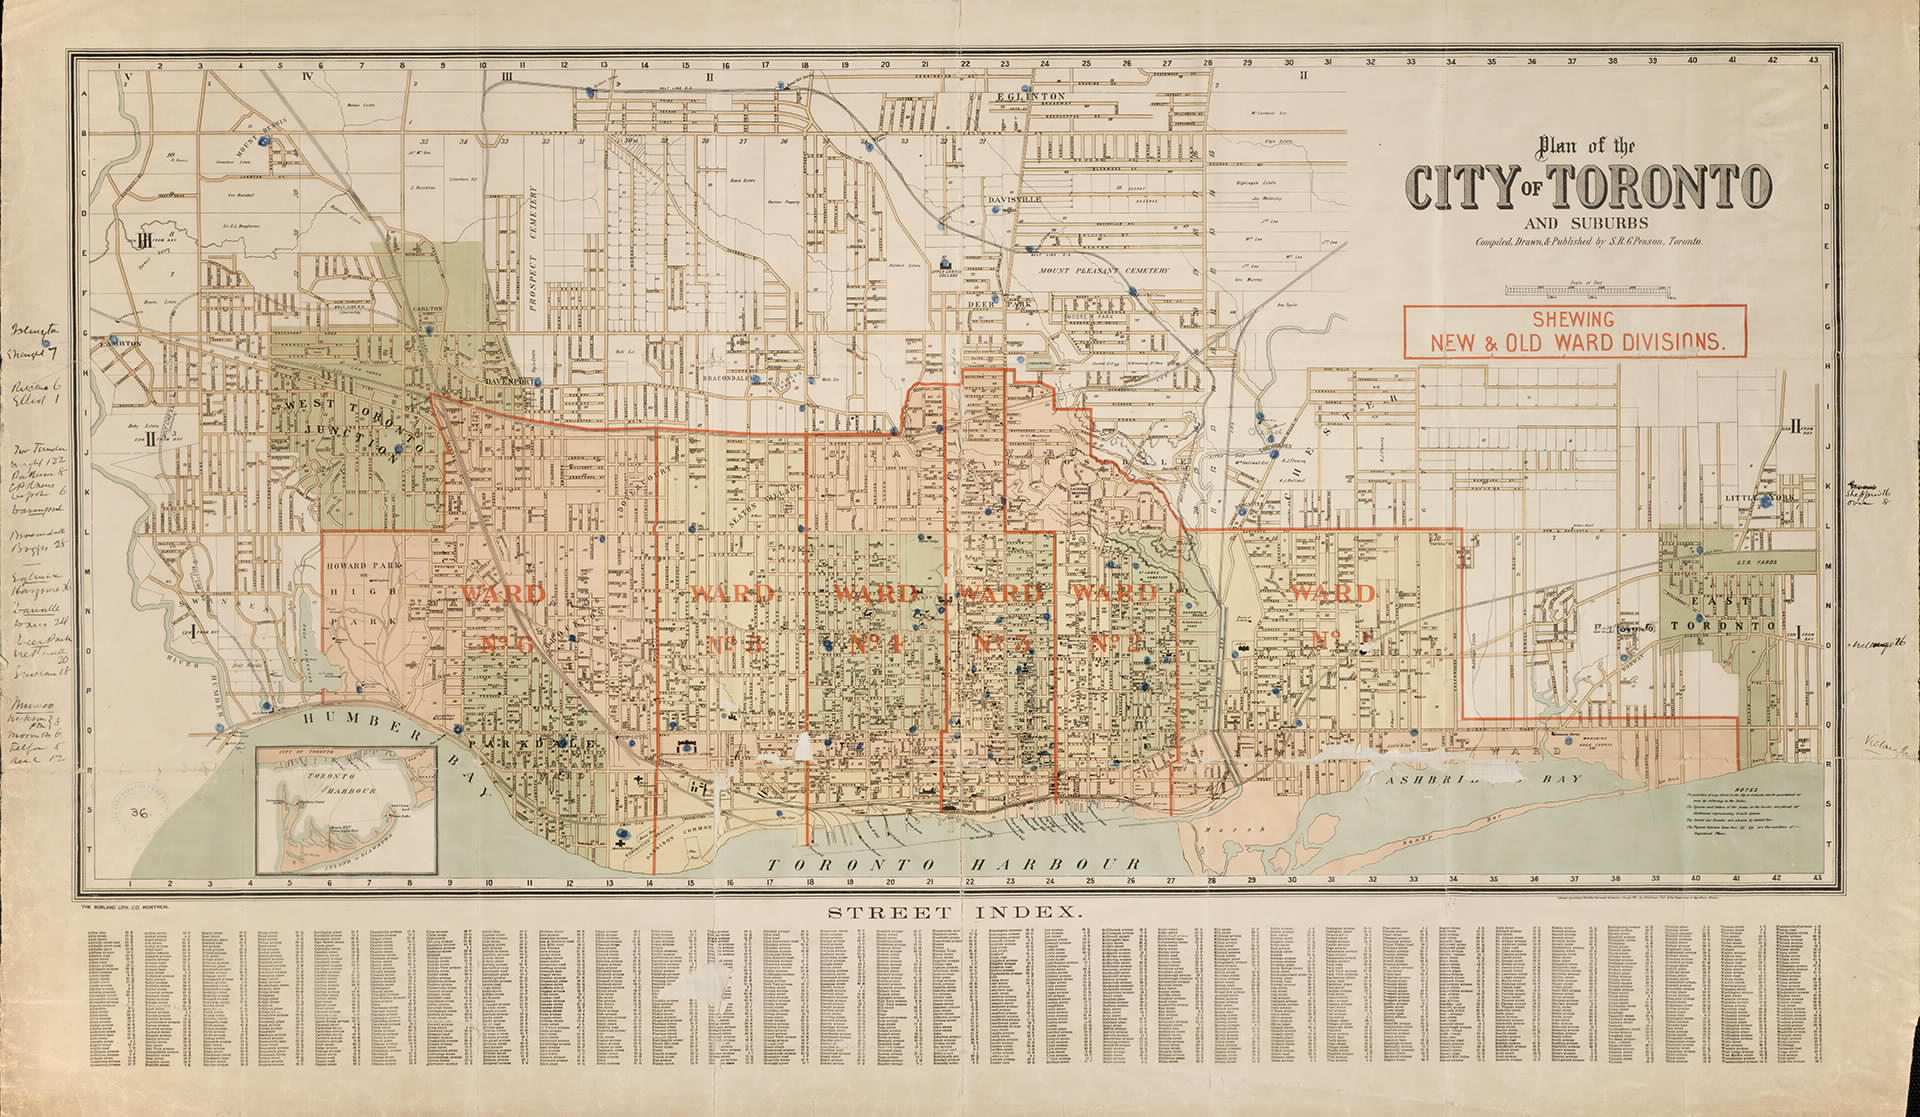 1891 - Plan of the City of Toronto and suburbs shewing new & old ward divisions